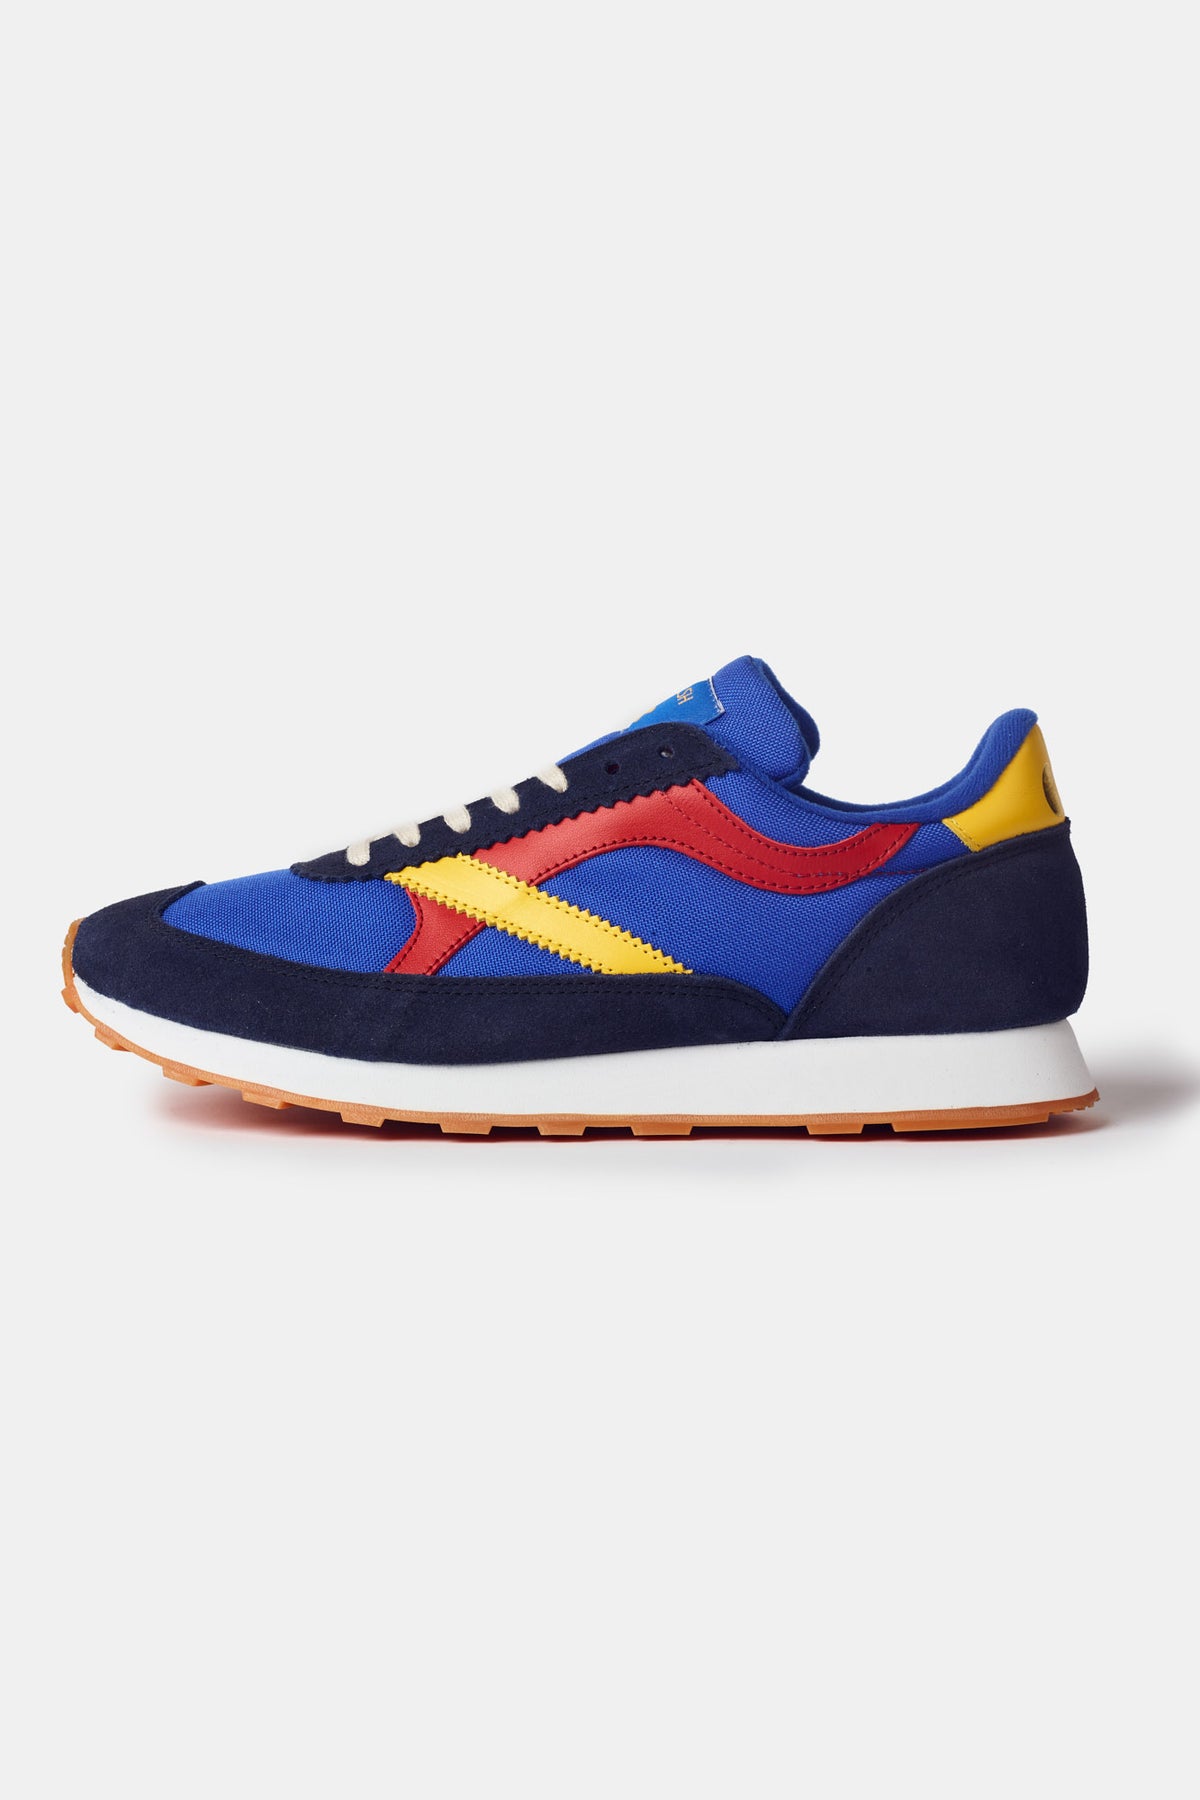 
            Men&#39;s Beacon Trainer in blue. Side image shows red and yellow design